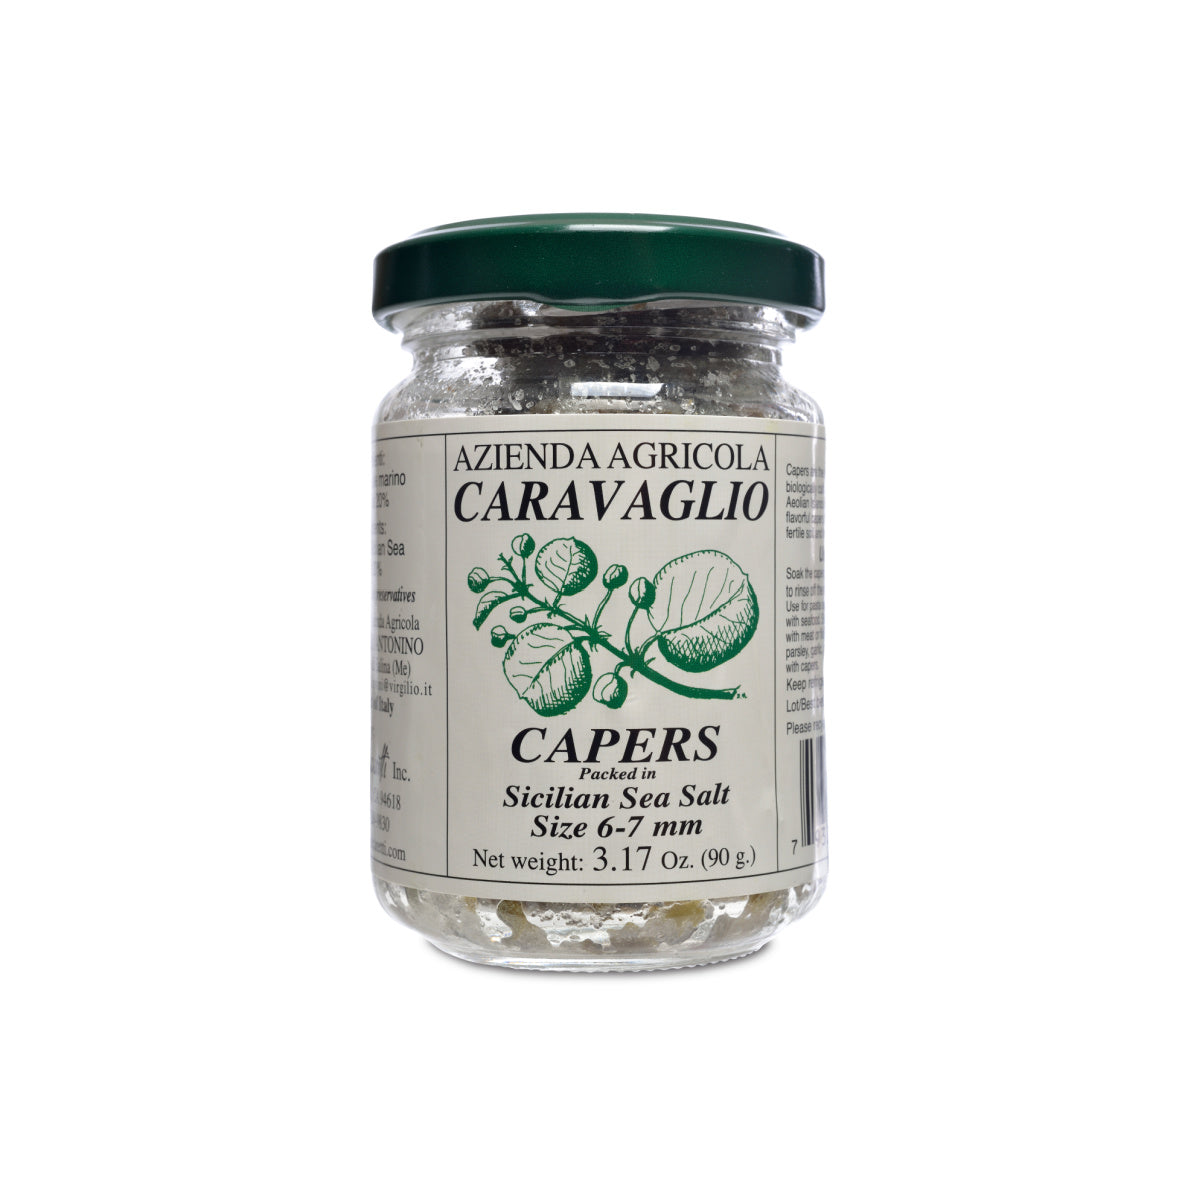 Caravaglio Capers from Sicily CVG-001